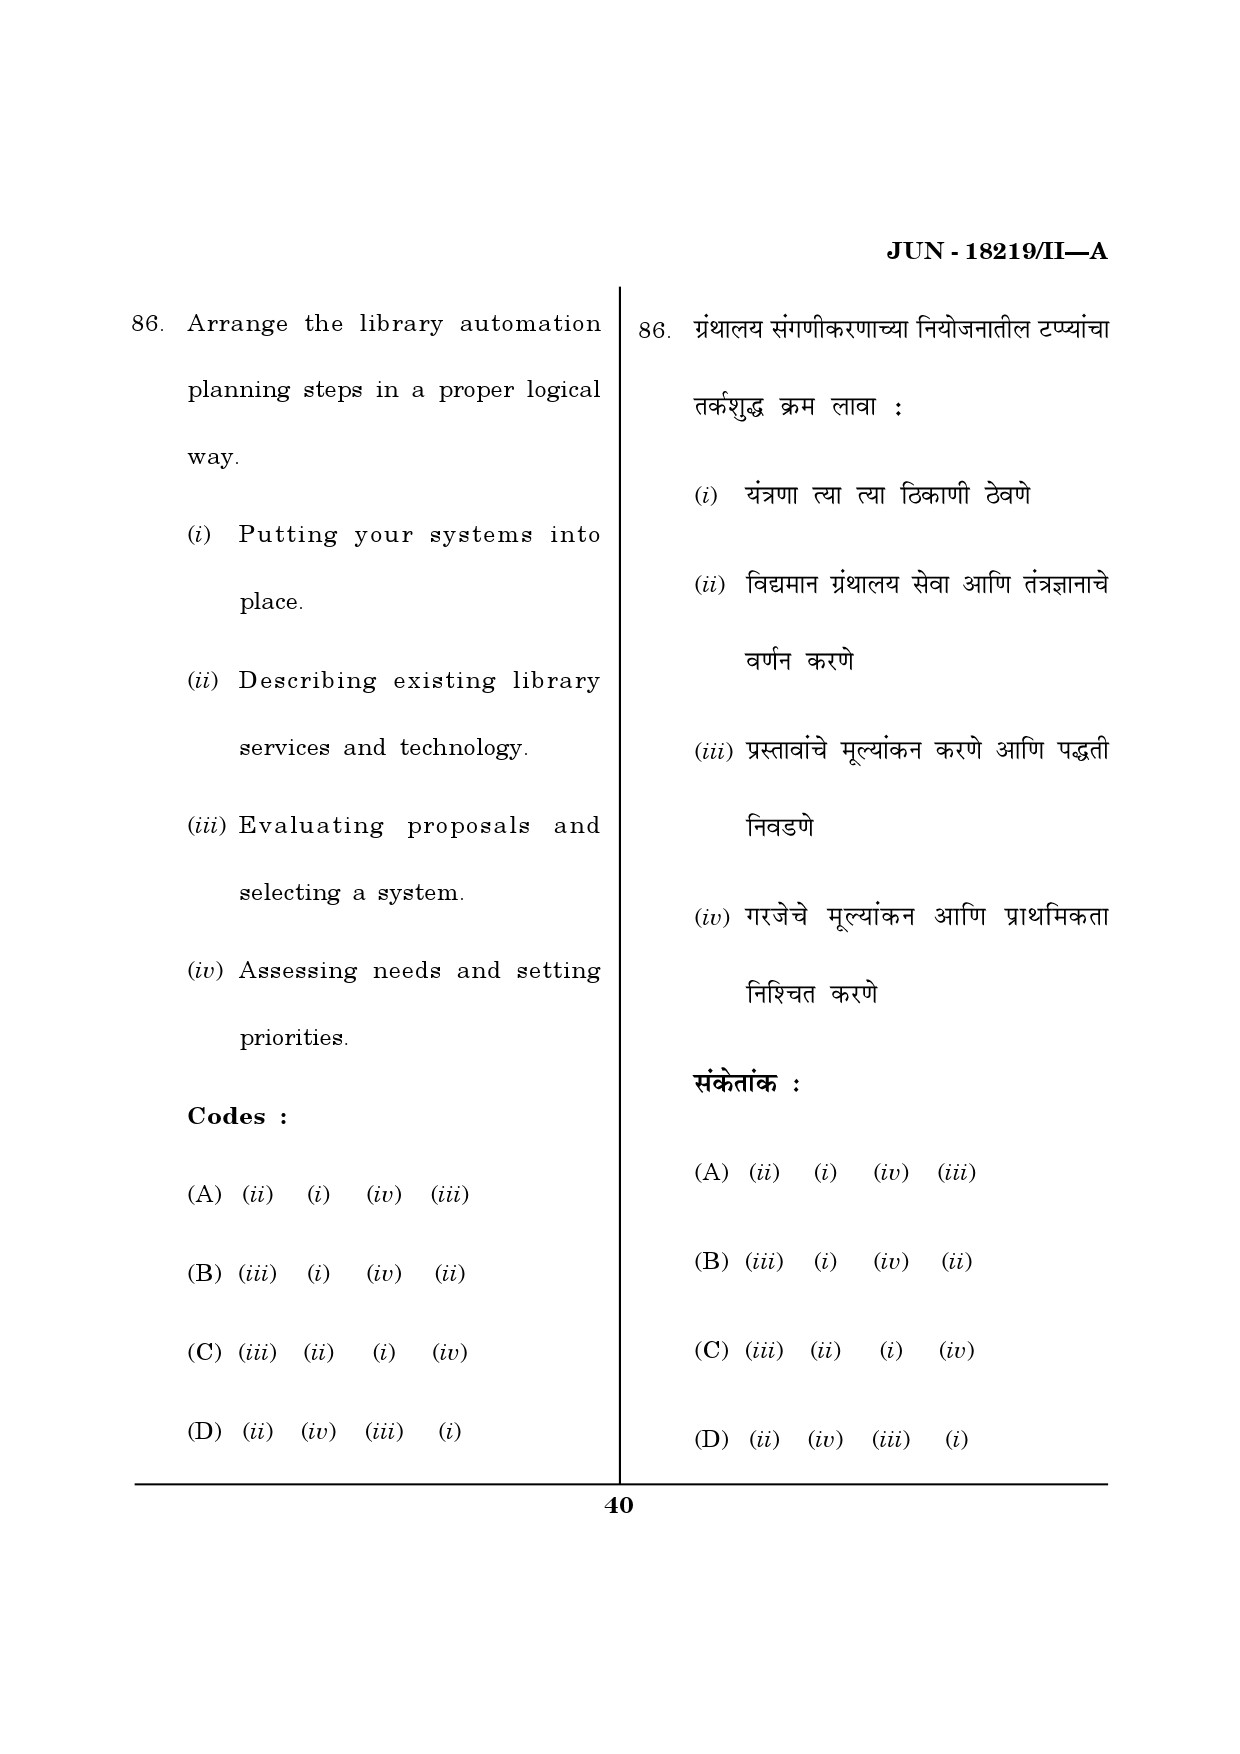 Maharashtra SET Library Information Science Question Paper II June 2019 39